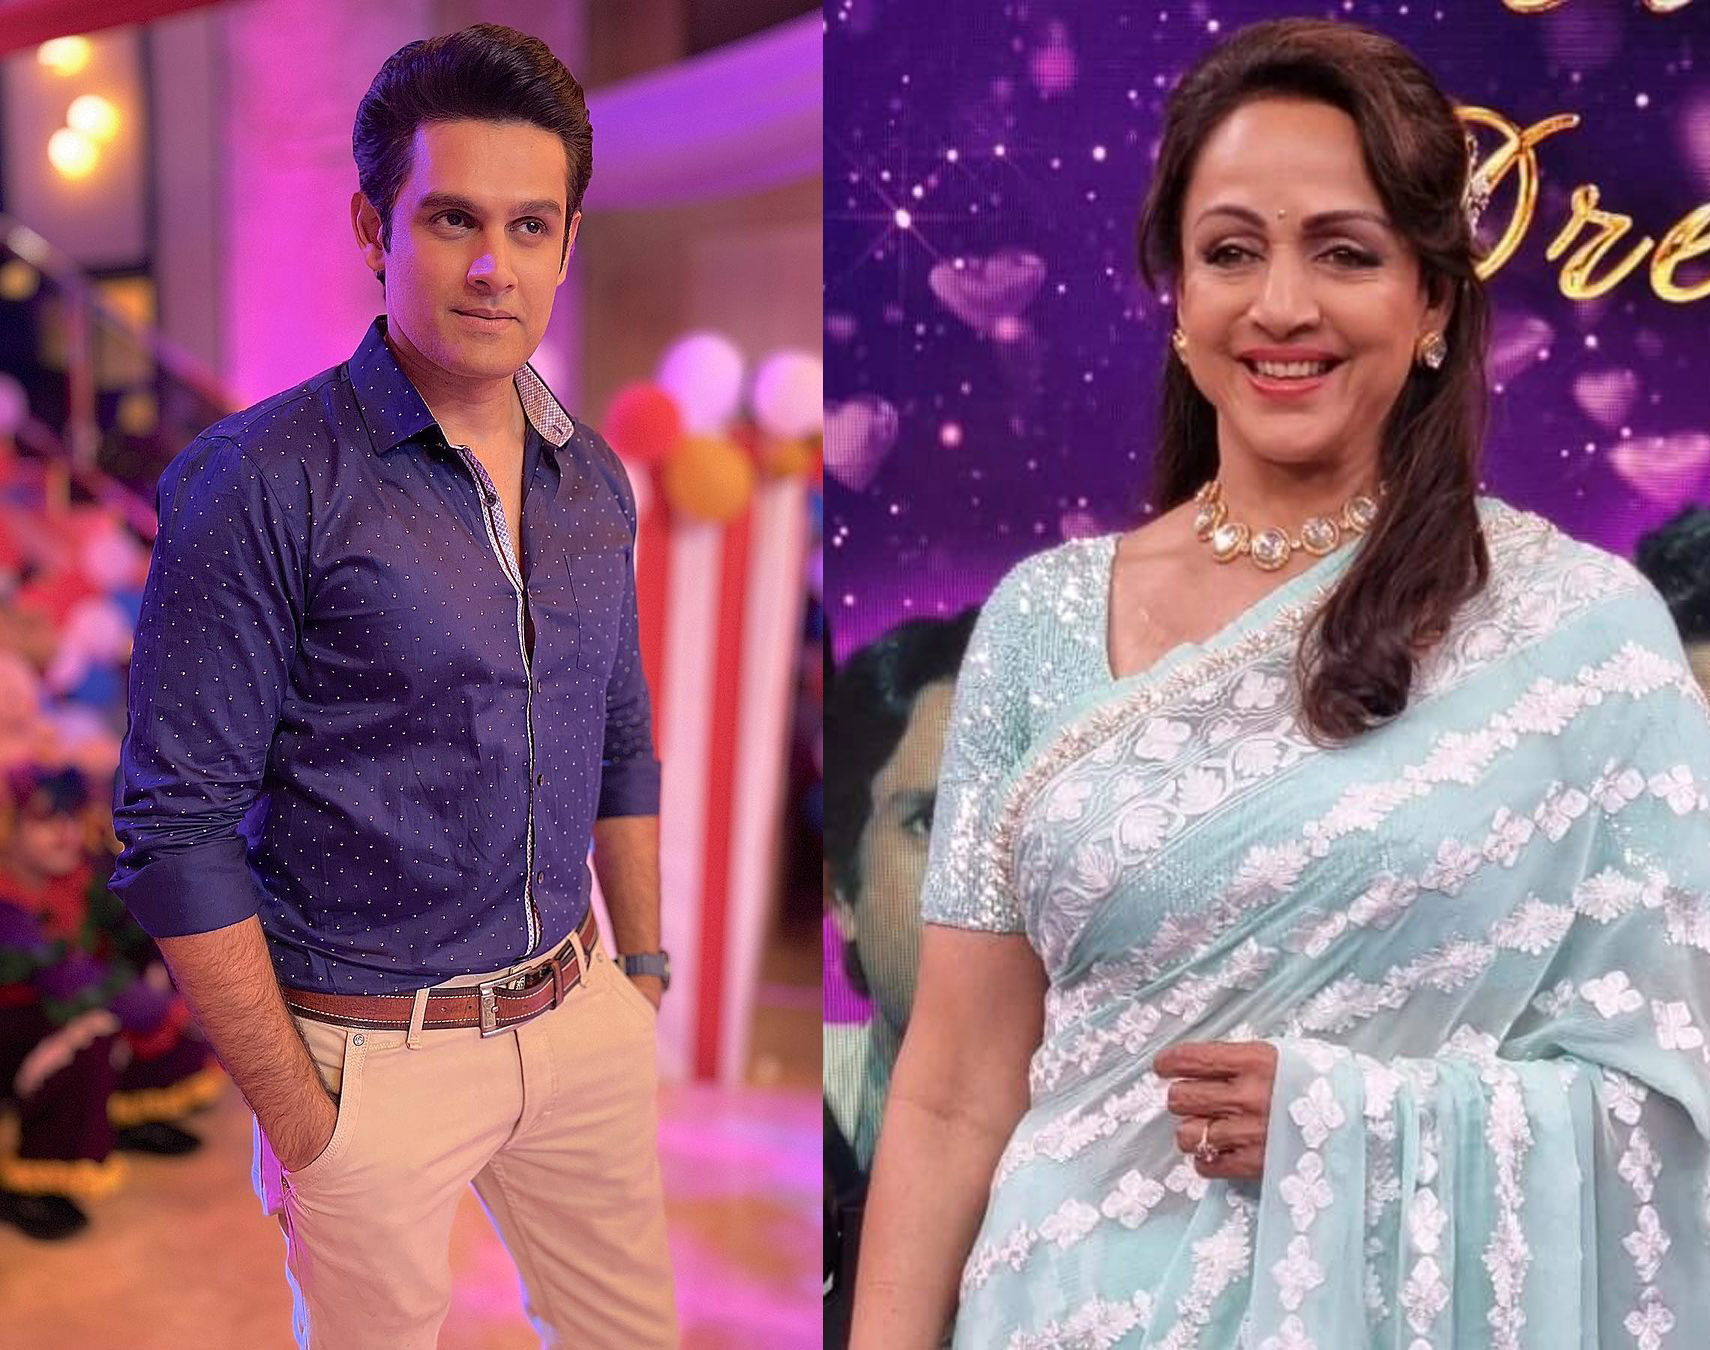 Exclusive! Actor Vishal Nayak Is To Perform At Historic Opening Of Ram Mandir In Ayodhya With Legendary Actress Hema Malini. He Says It As A Surreal Moment!